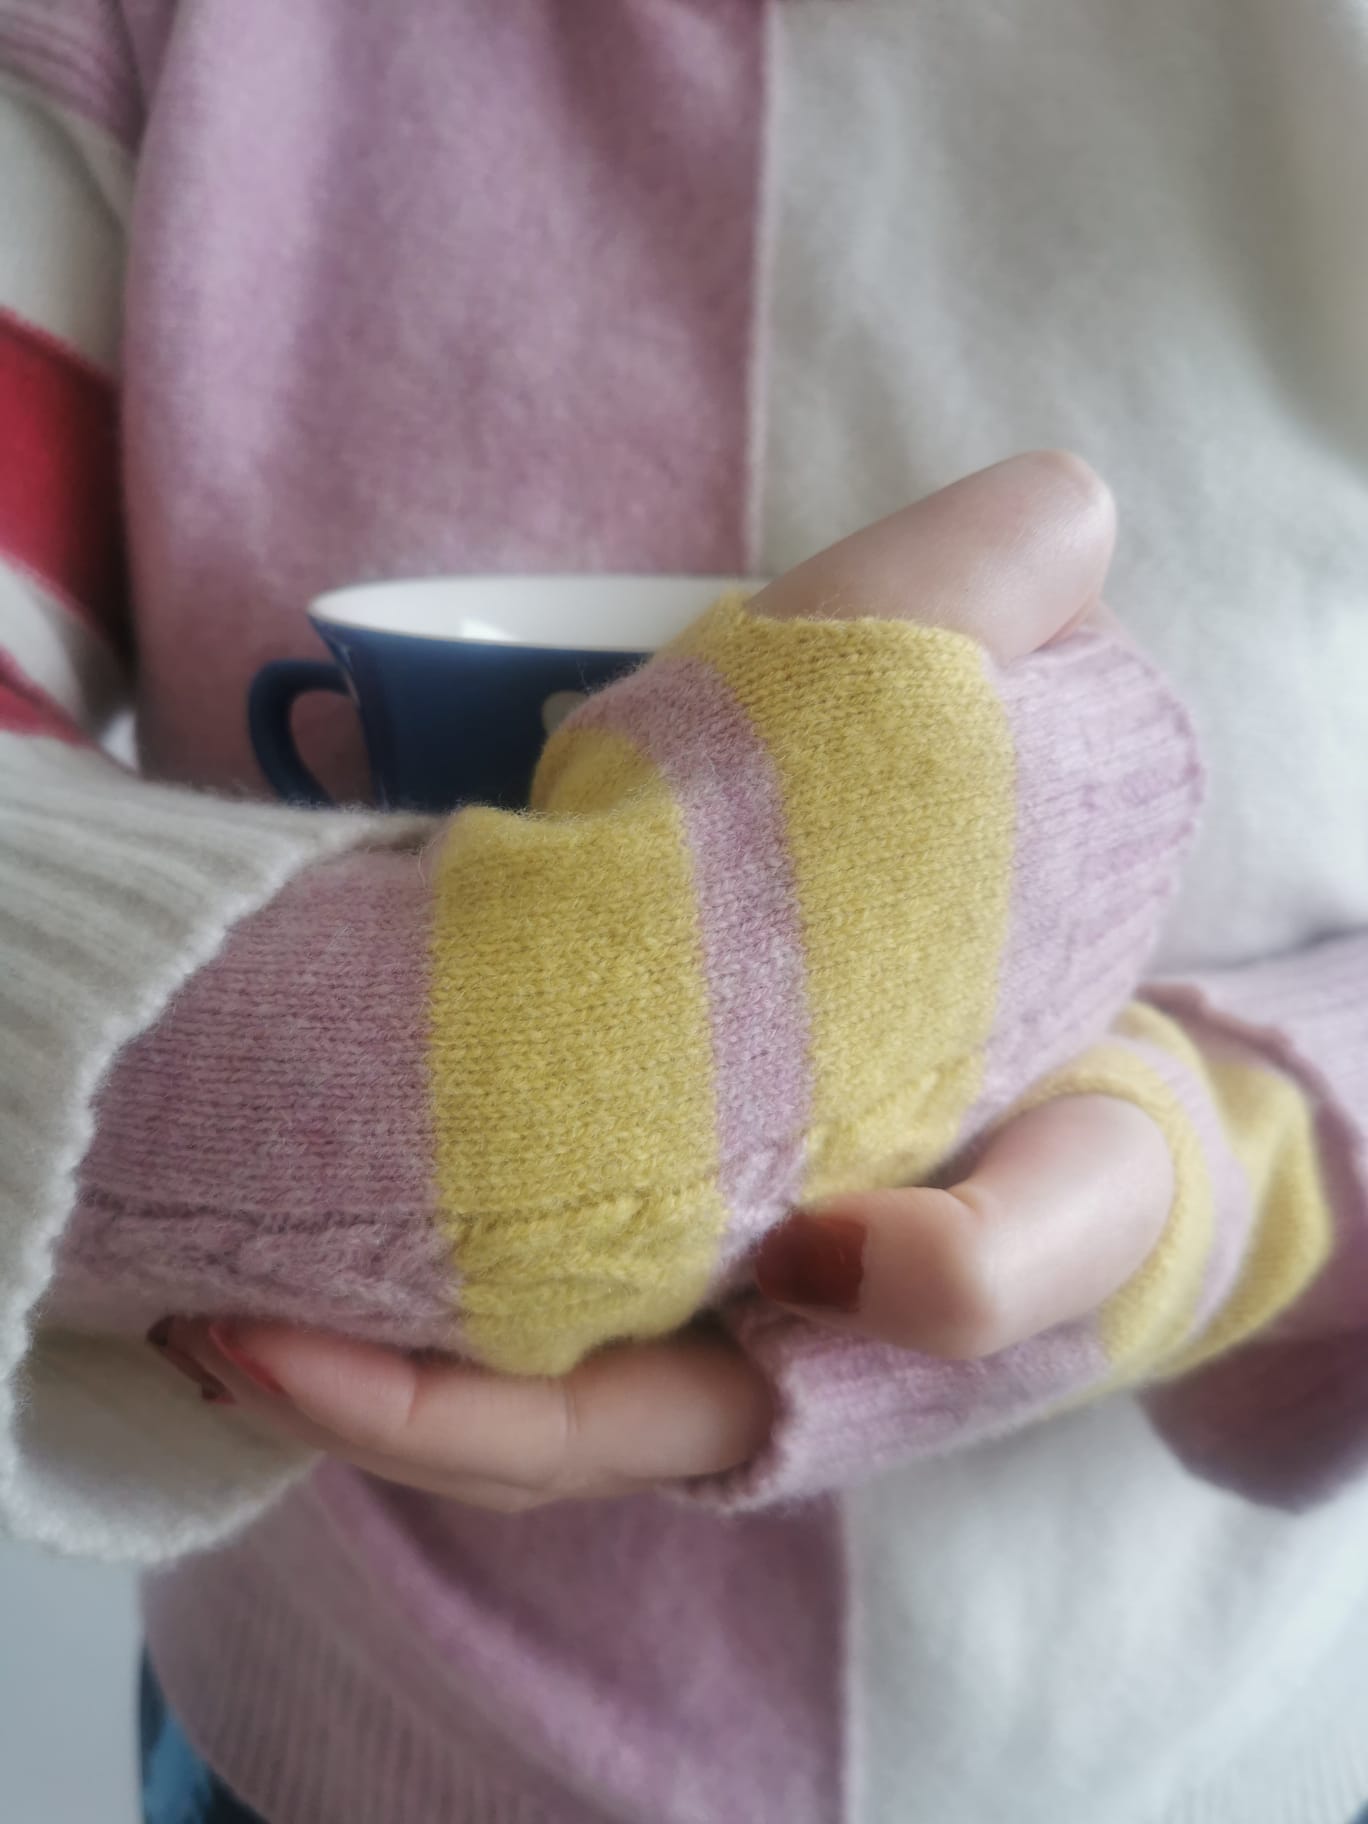 Muddle Bus 03- Pied Piper Wrist Warmers. Hands folded around a blue spot cup wearing knitted pink and yellow stripe fingerless gloves. Muddle Bus 02 Pied Piper Jumper in Pink/Pink/White as background,